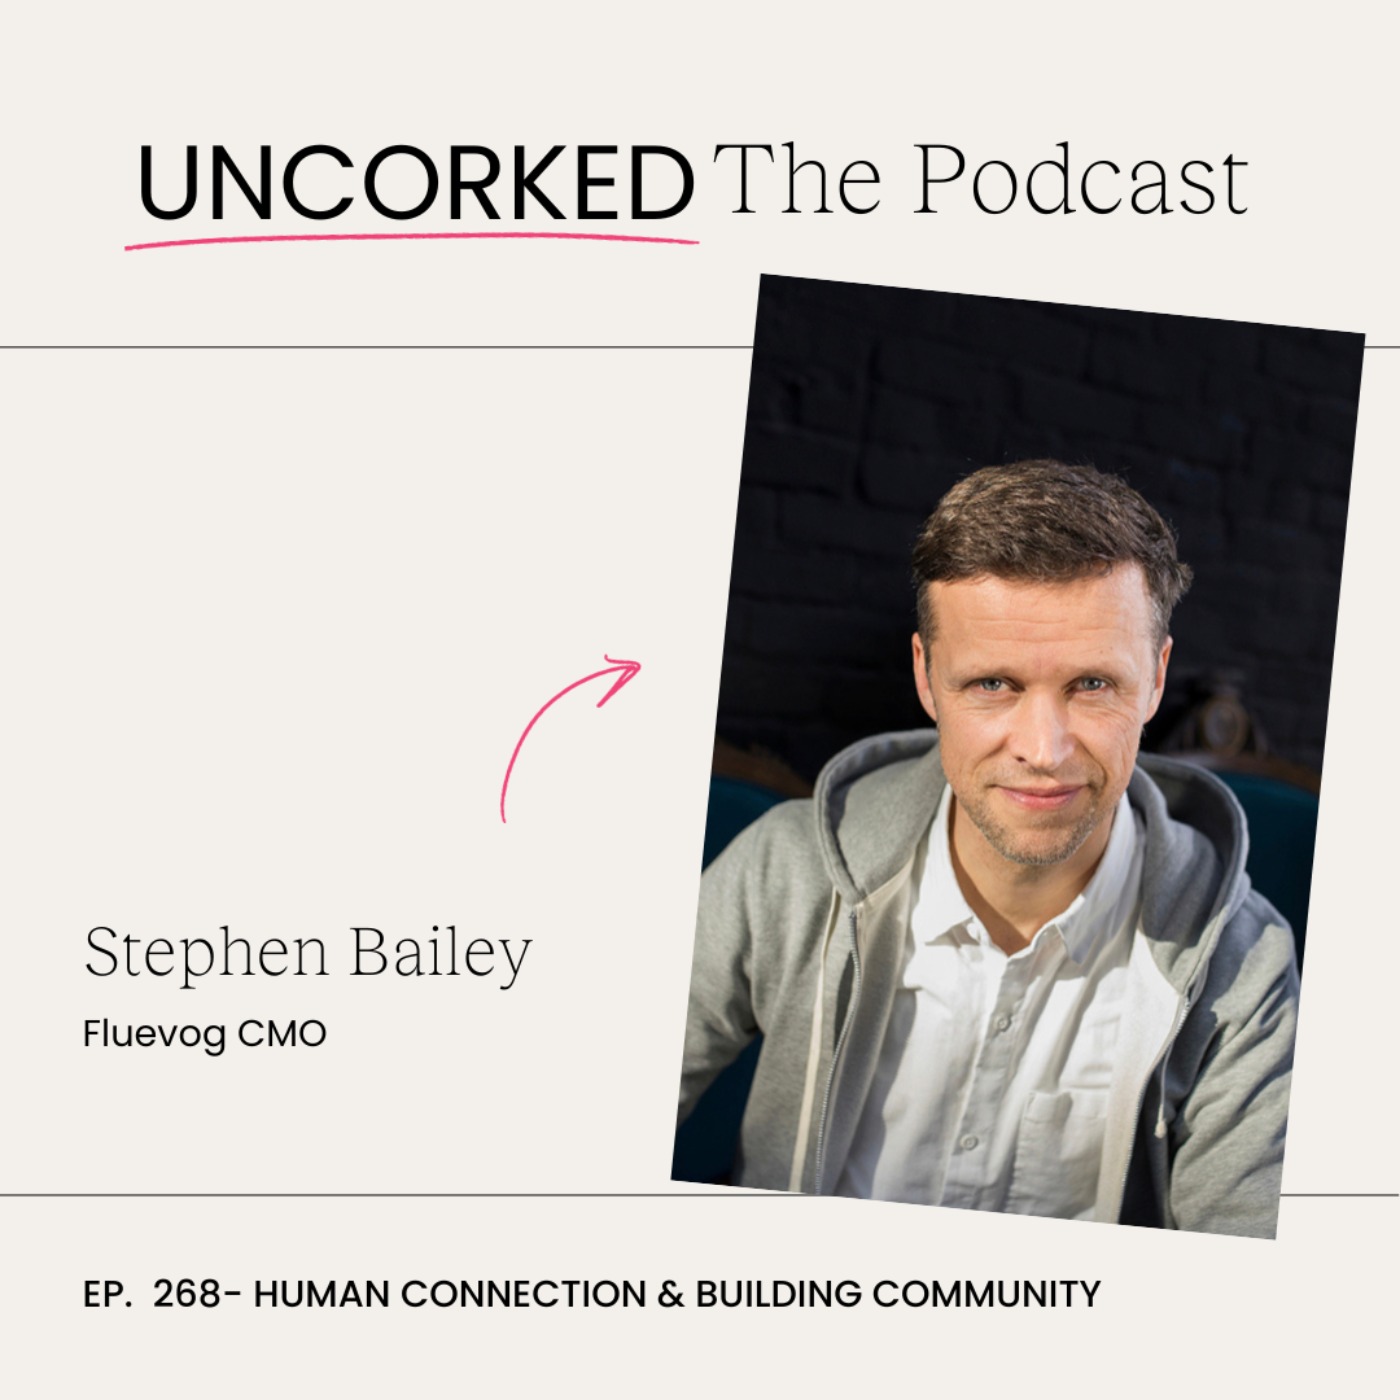 Human Connection & Building Community with Stephen Bailey